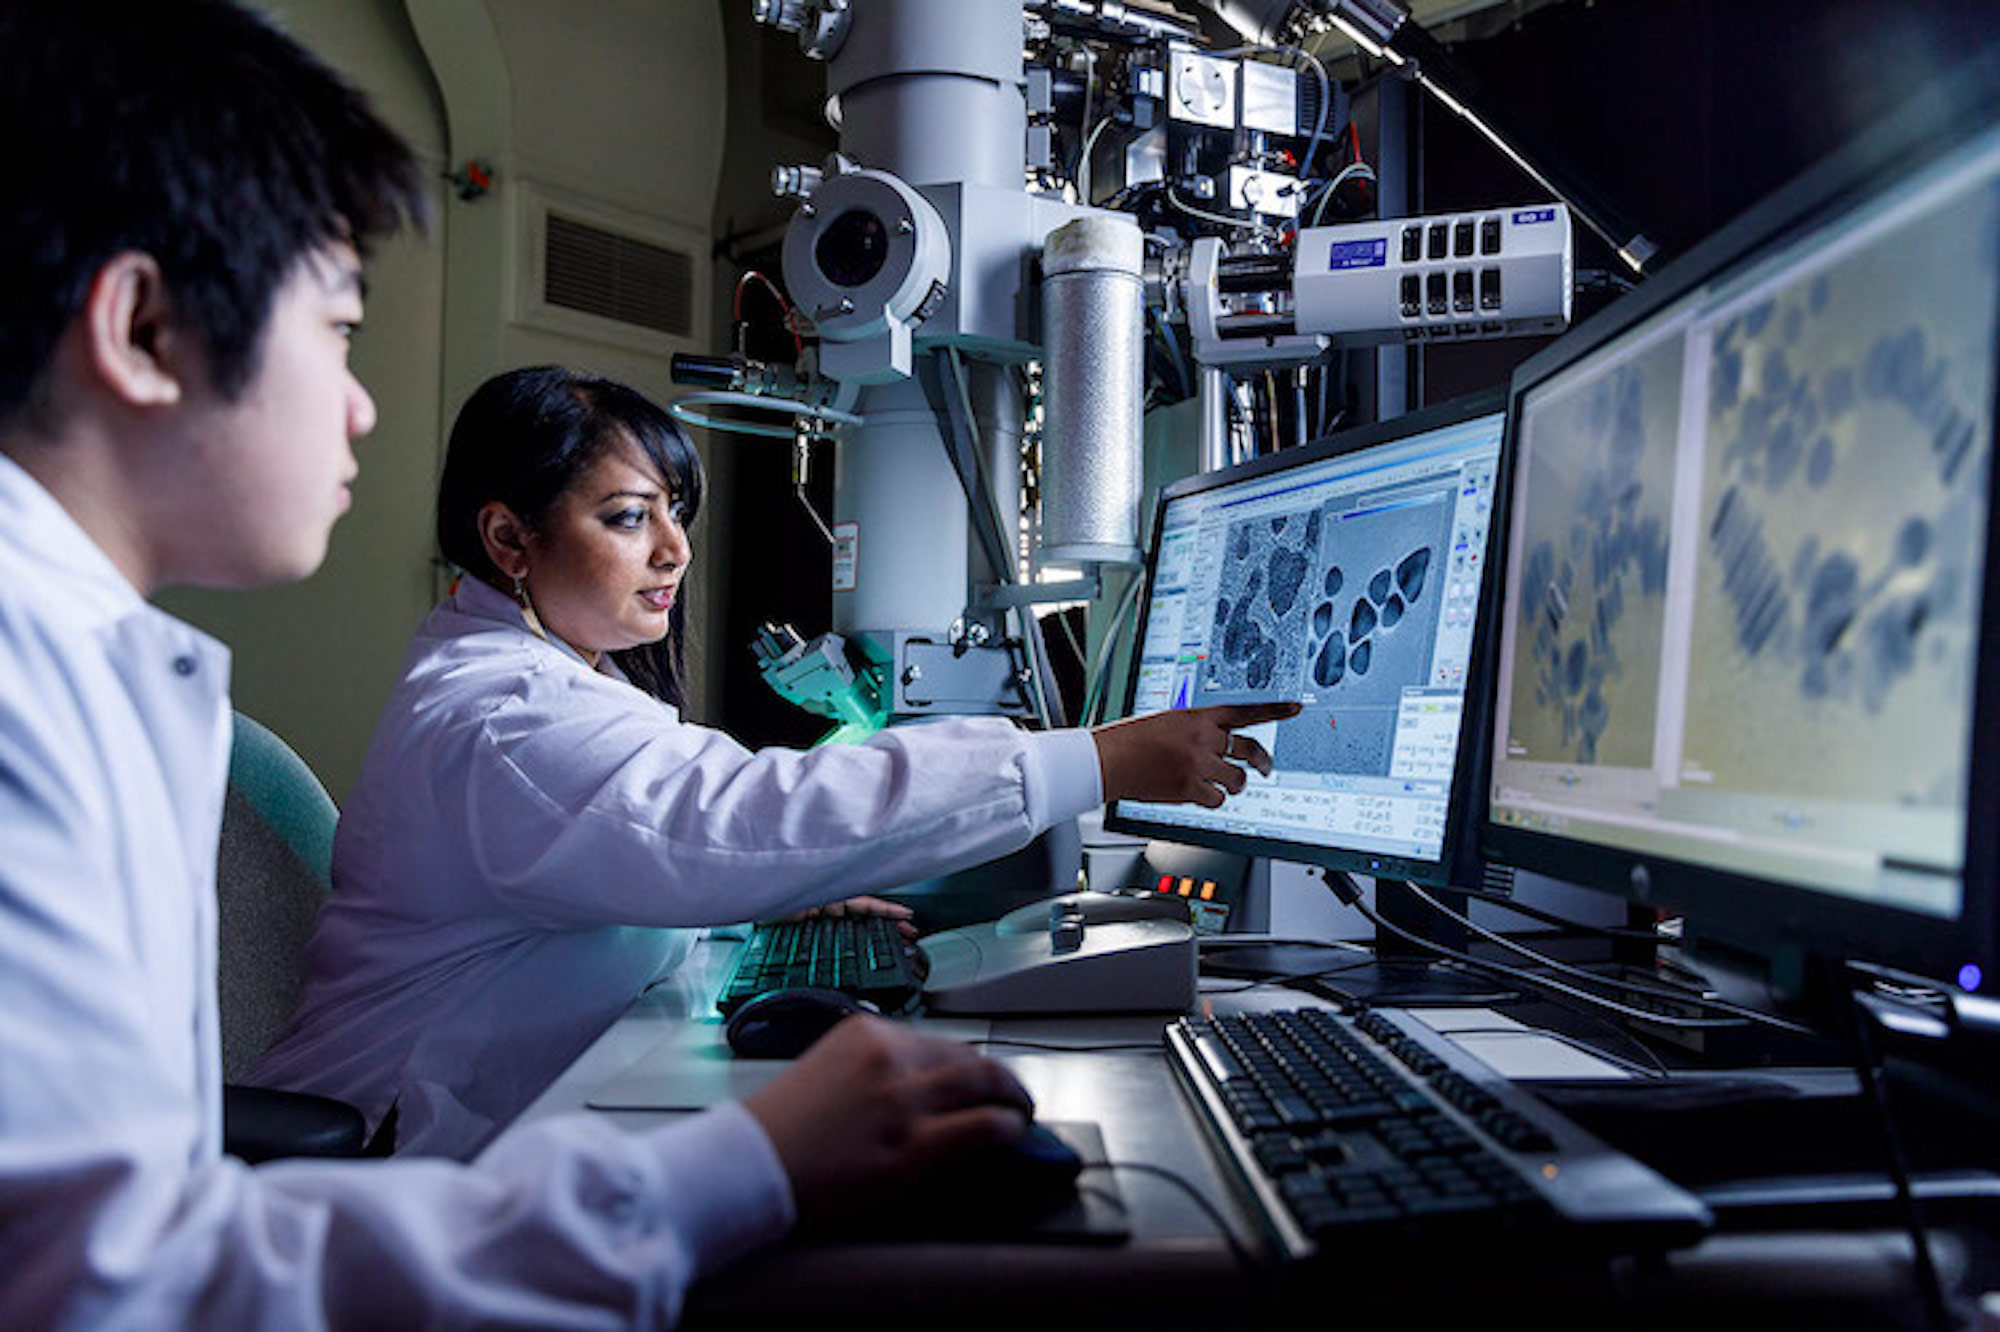 researcher and student look at cells on computer in lab setting